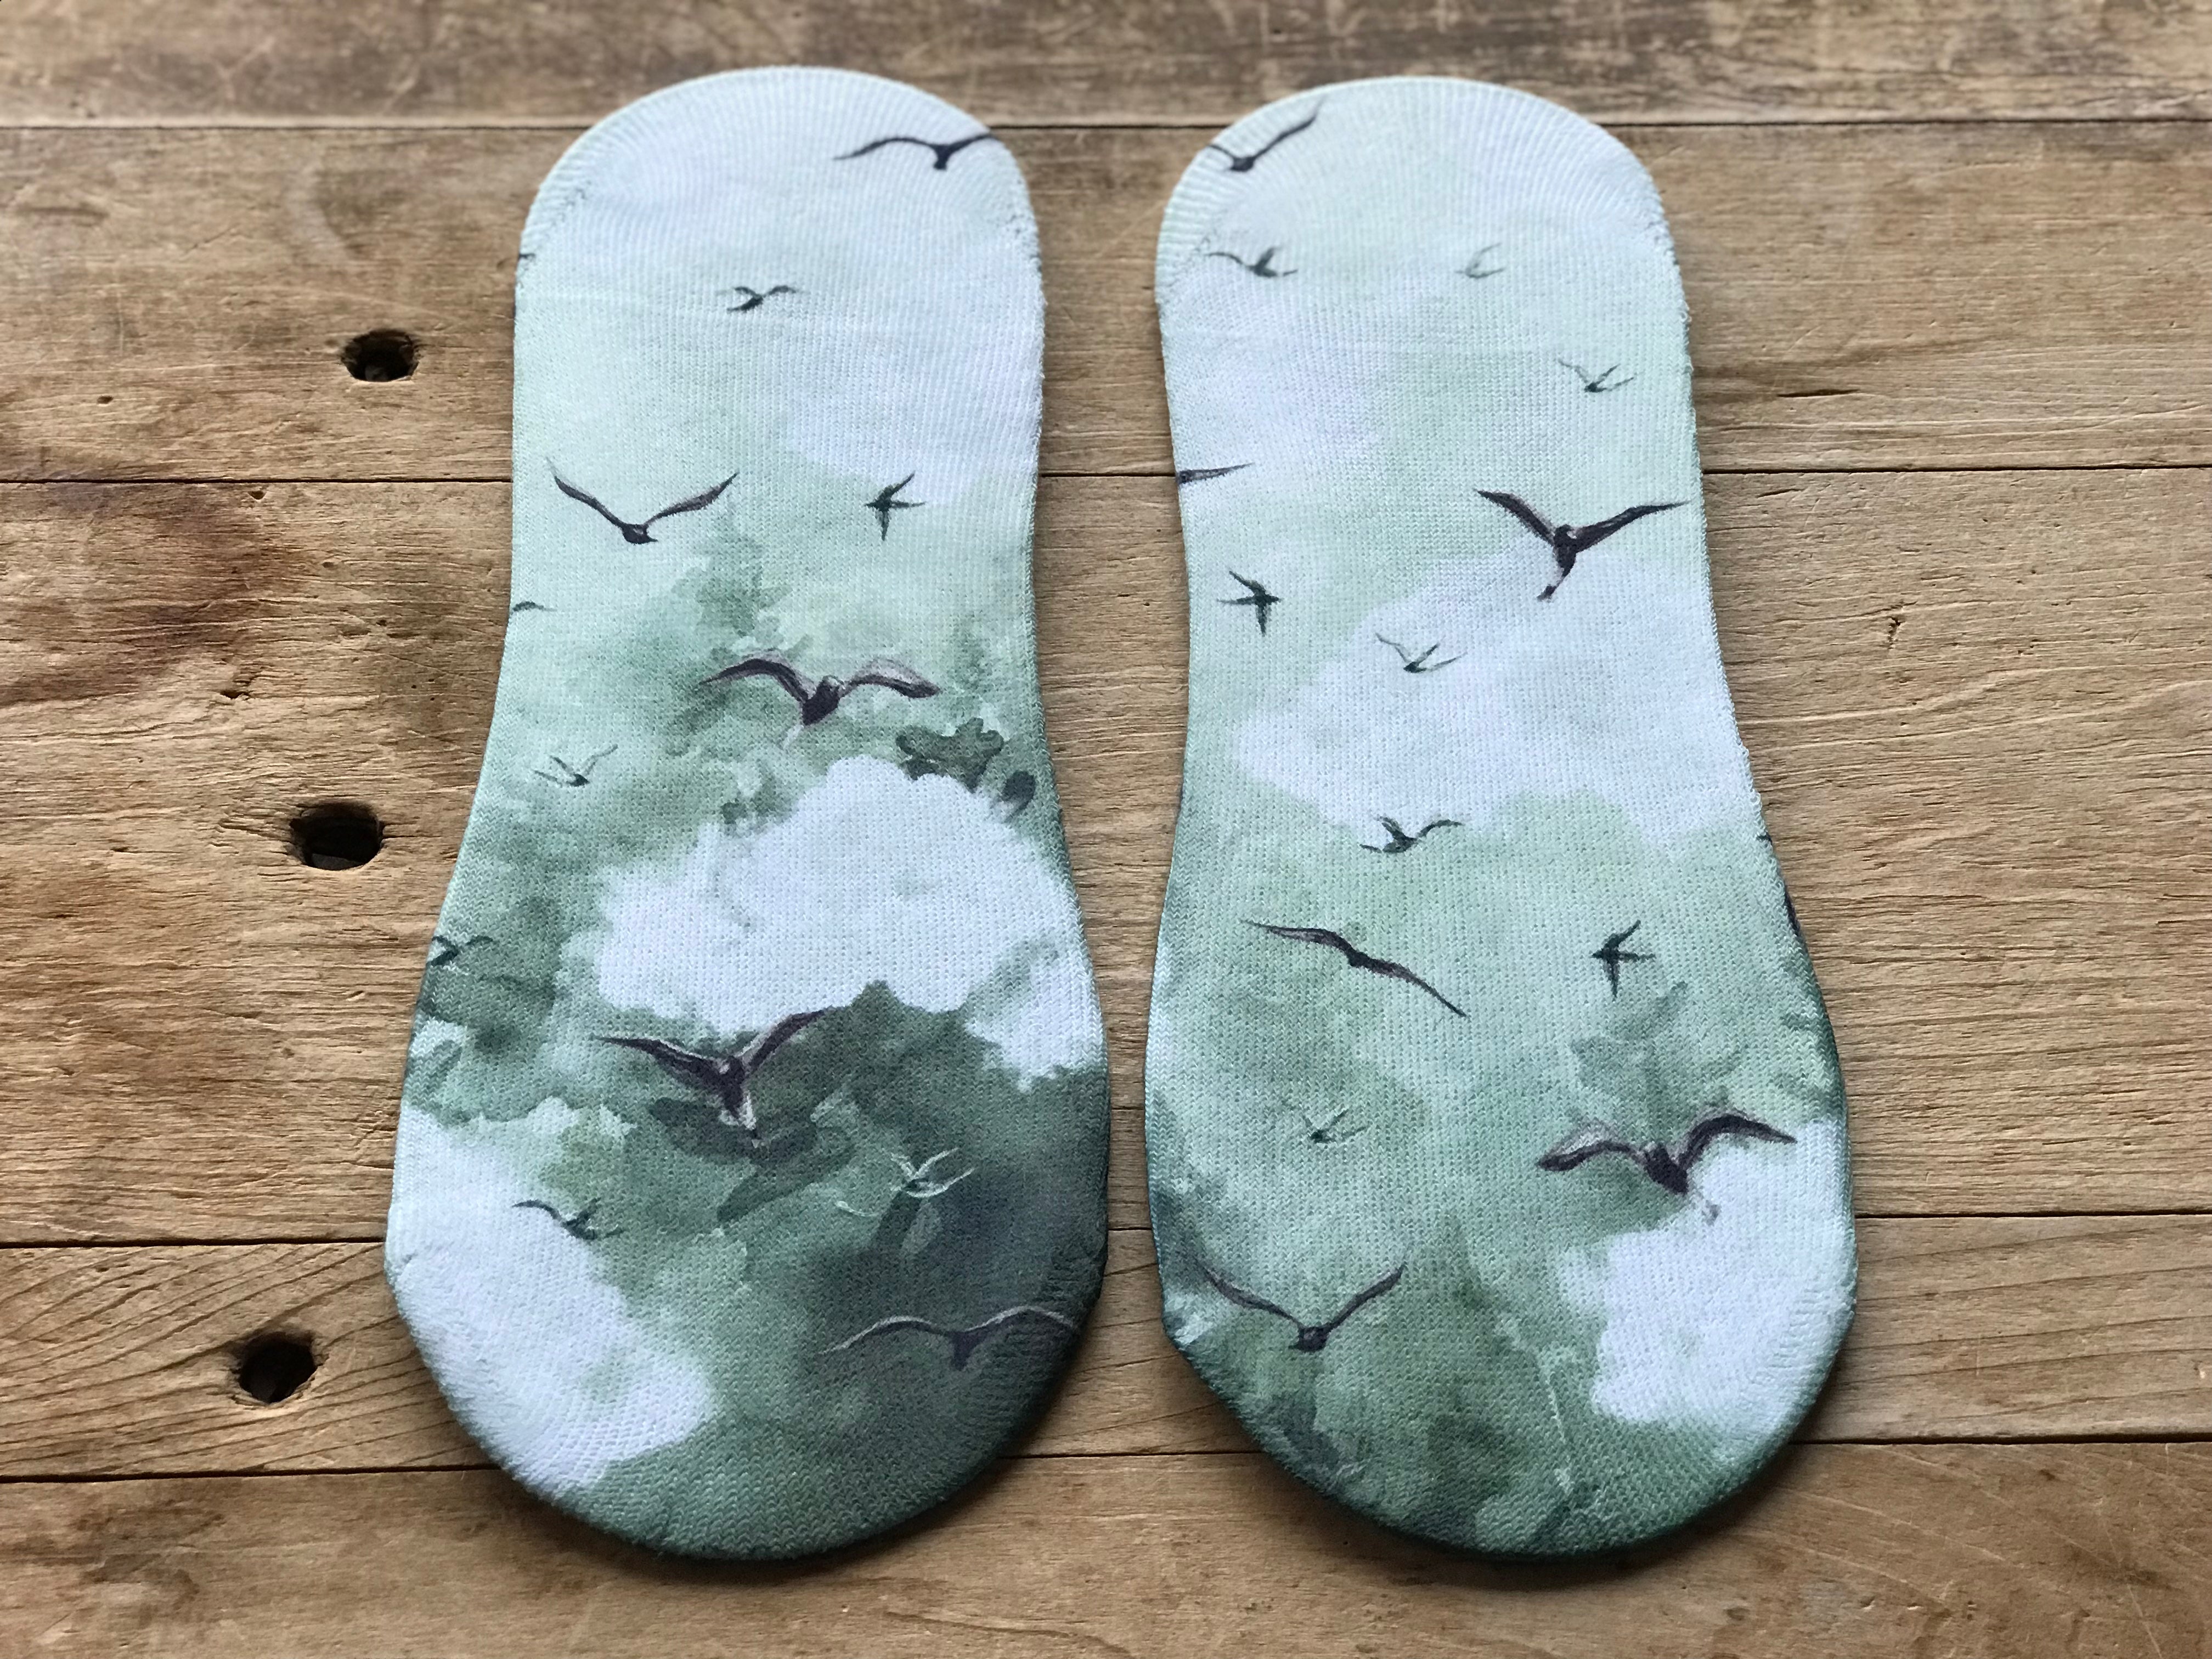 Into the Woods Evergreen State His & Hers Socks